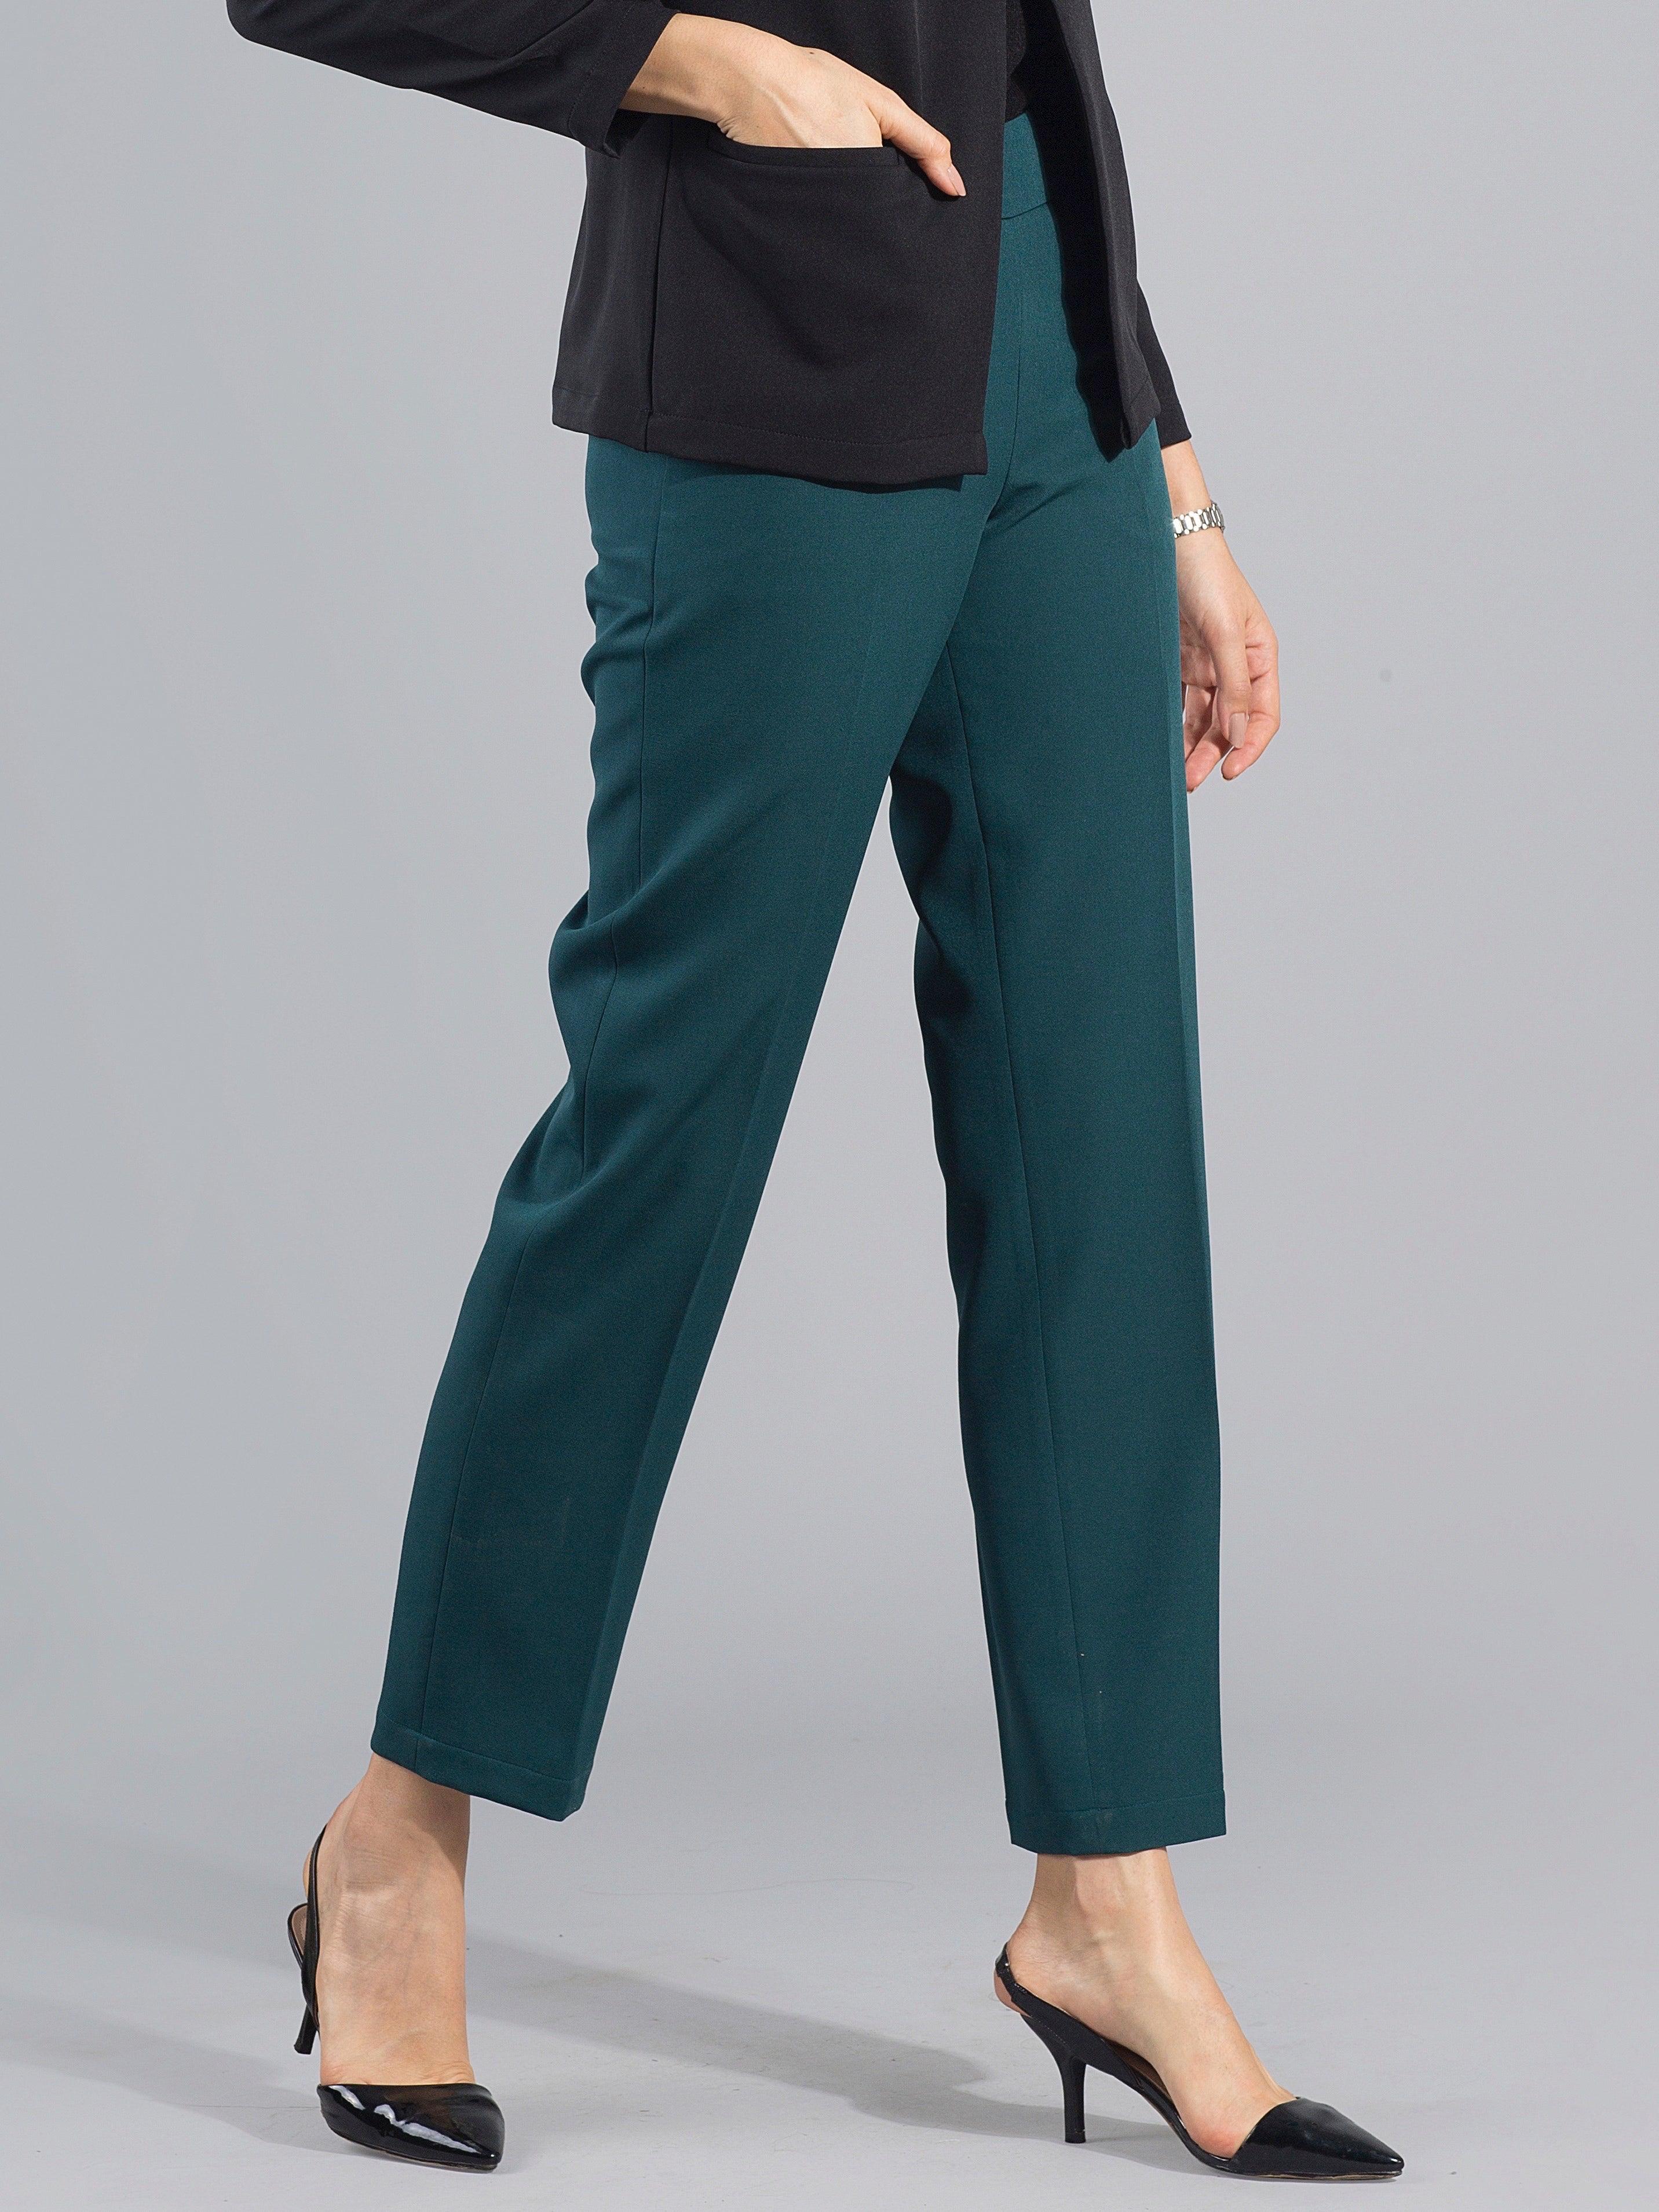 Essential Easy Care Work Trousers - Bottle Green| Formal Trousers